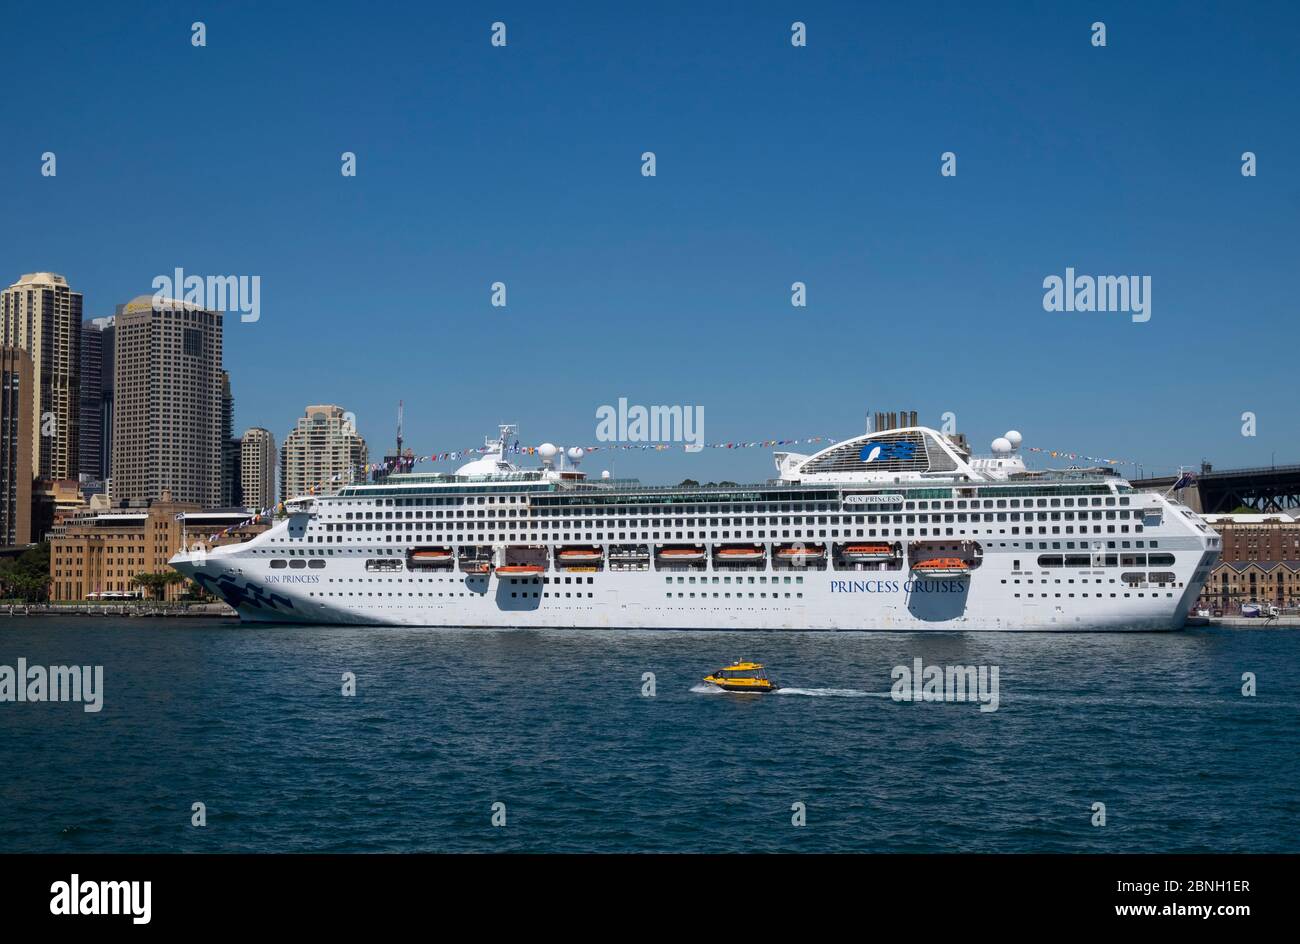 Looking tacross Sydney Harbour towards the  Sun Princess  cruise liner docked at the Overseas Passenger Terminal, Sydney, New South Wales, Australia. Stock Photo